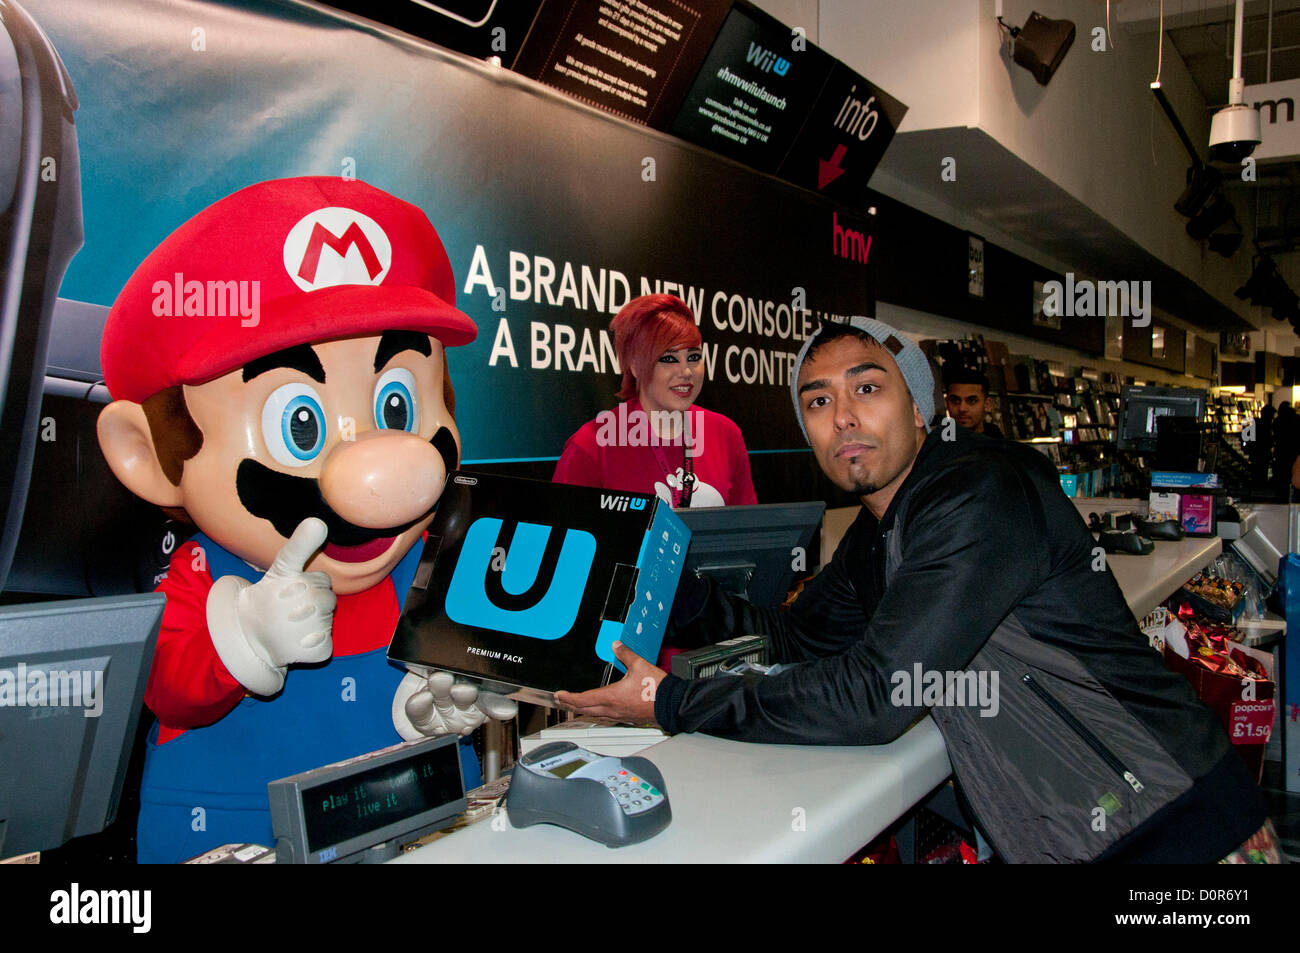 London, UK. 30/11/12. Izzy Rahmam is the first gamer to get his hands on  the brand new games console, the Nintendo Wii U. Izzy has been camping  outside HMV's flafship store on